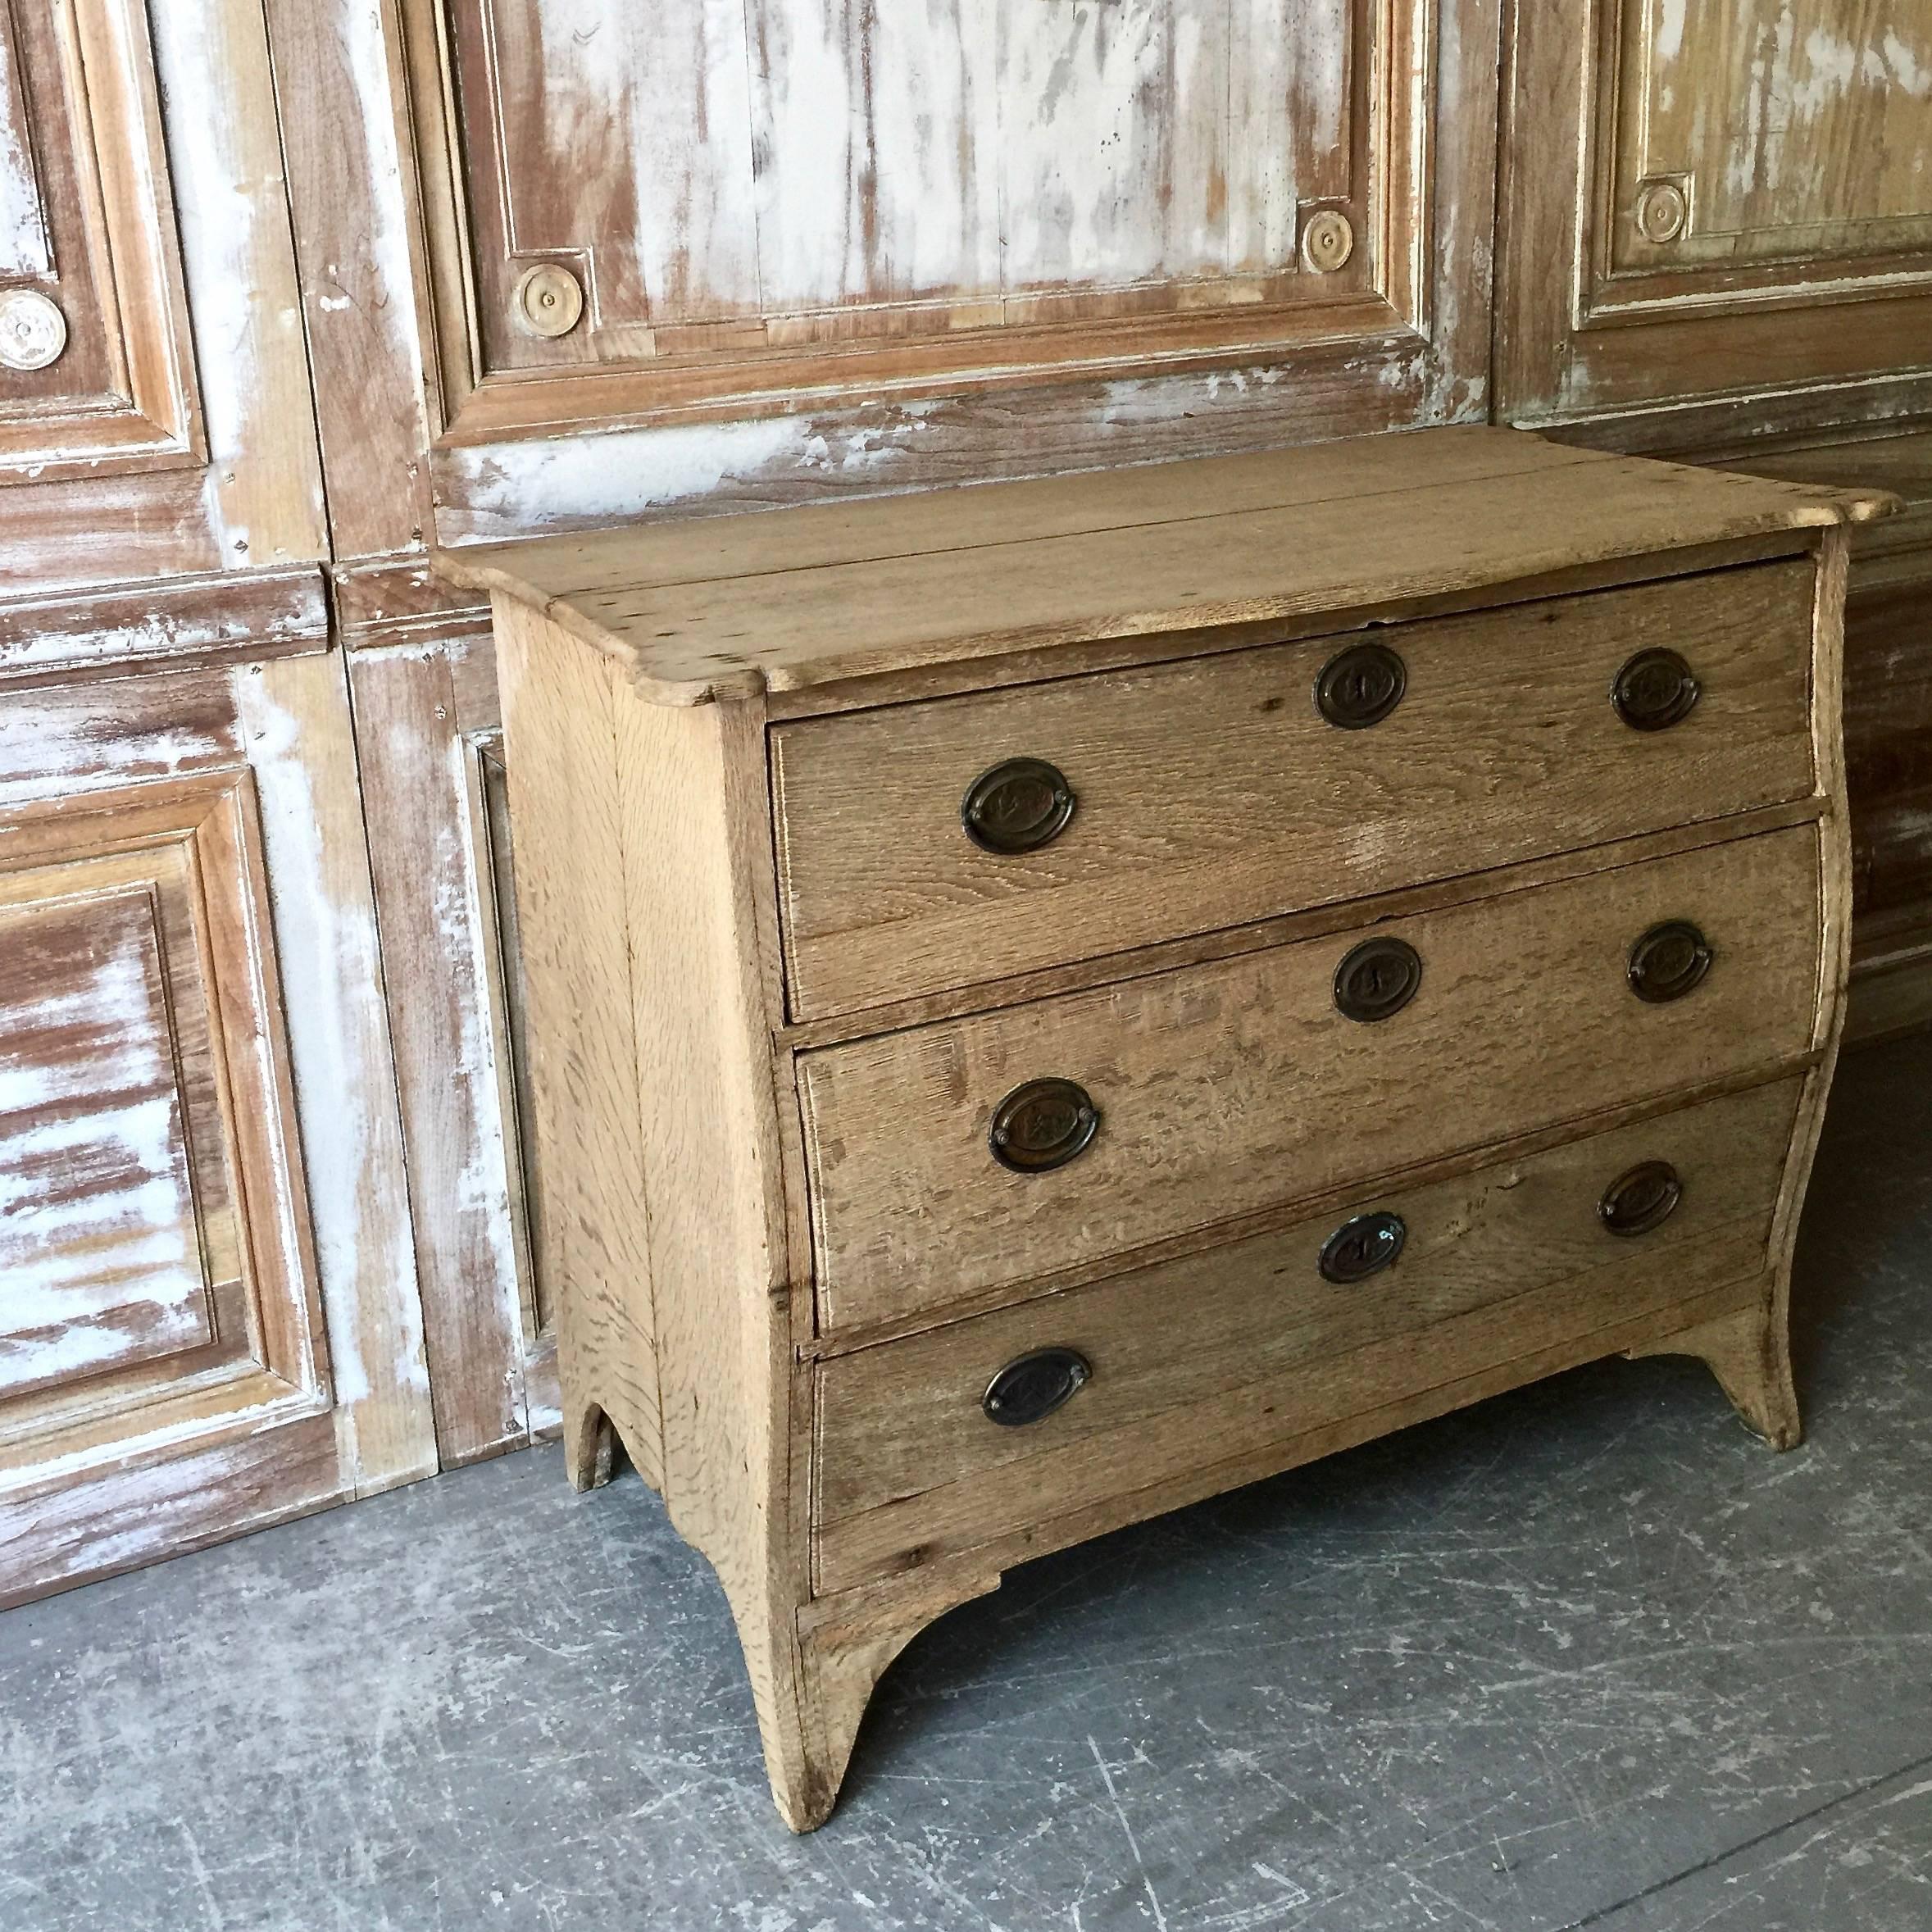 A charming and richly carved bombe front little Dutch commode with bombe front in bleached oak with super old patina.
Holland, early 19th century.
More than ever, we selected the best, the rarest, the unusual, the spectacular, the most charming